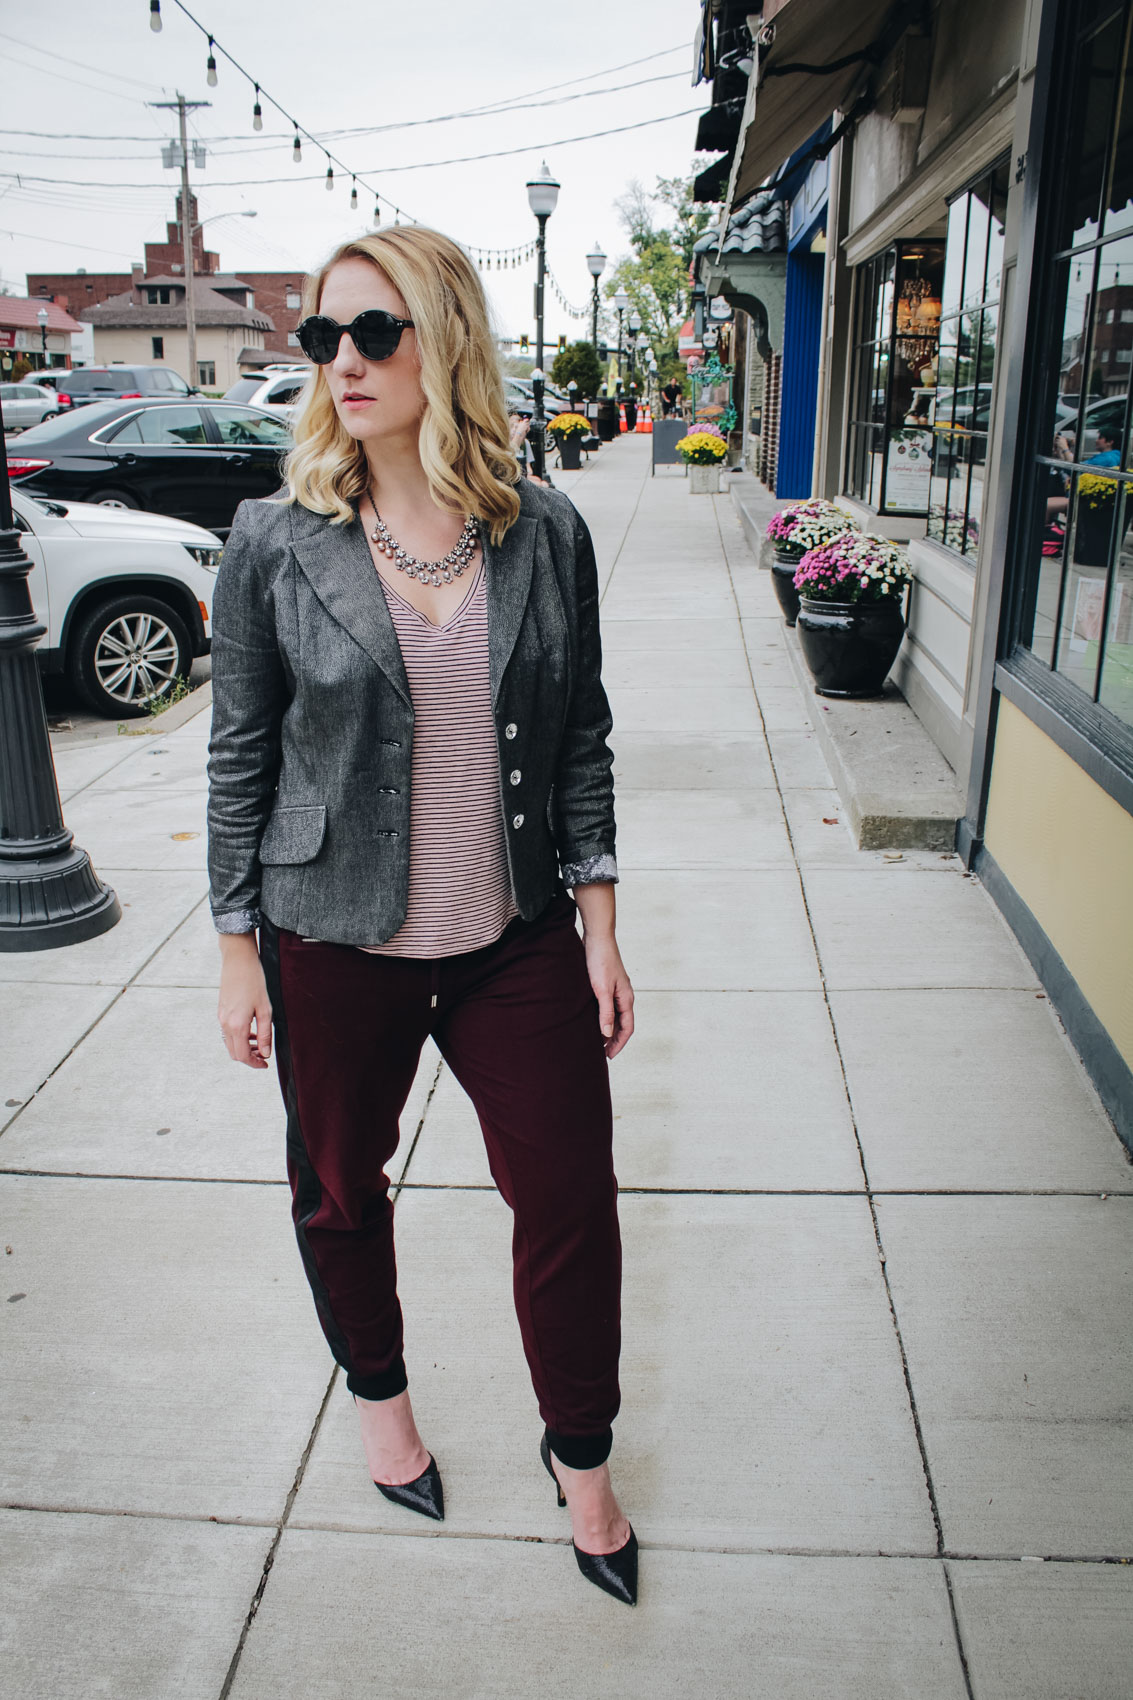 How to Dress Up Jogger Pants - Allyn Lewis